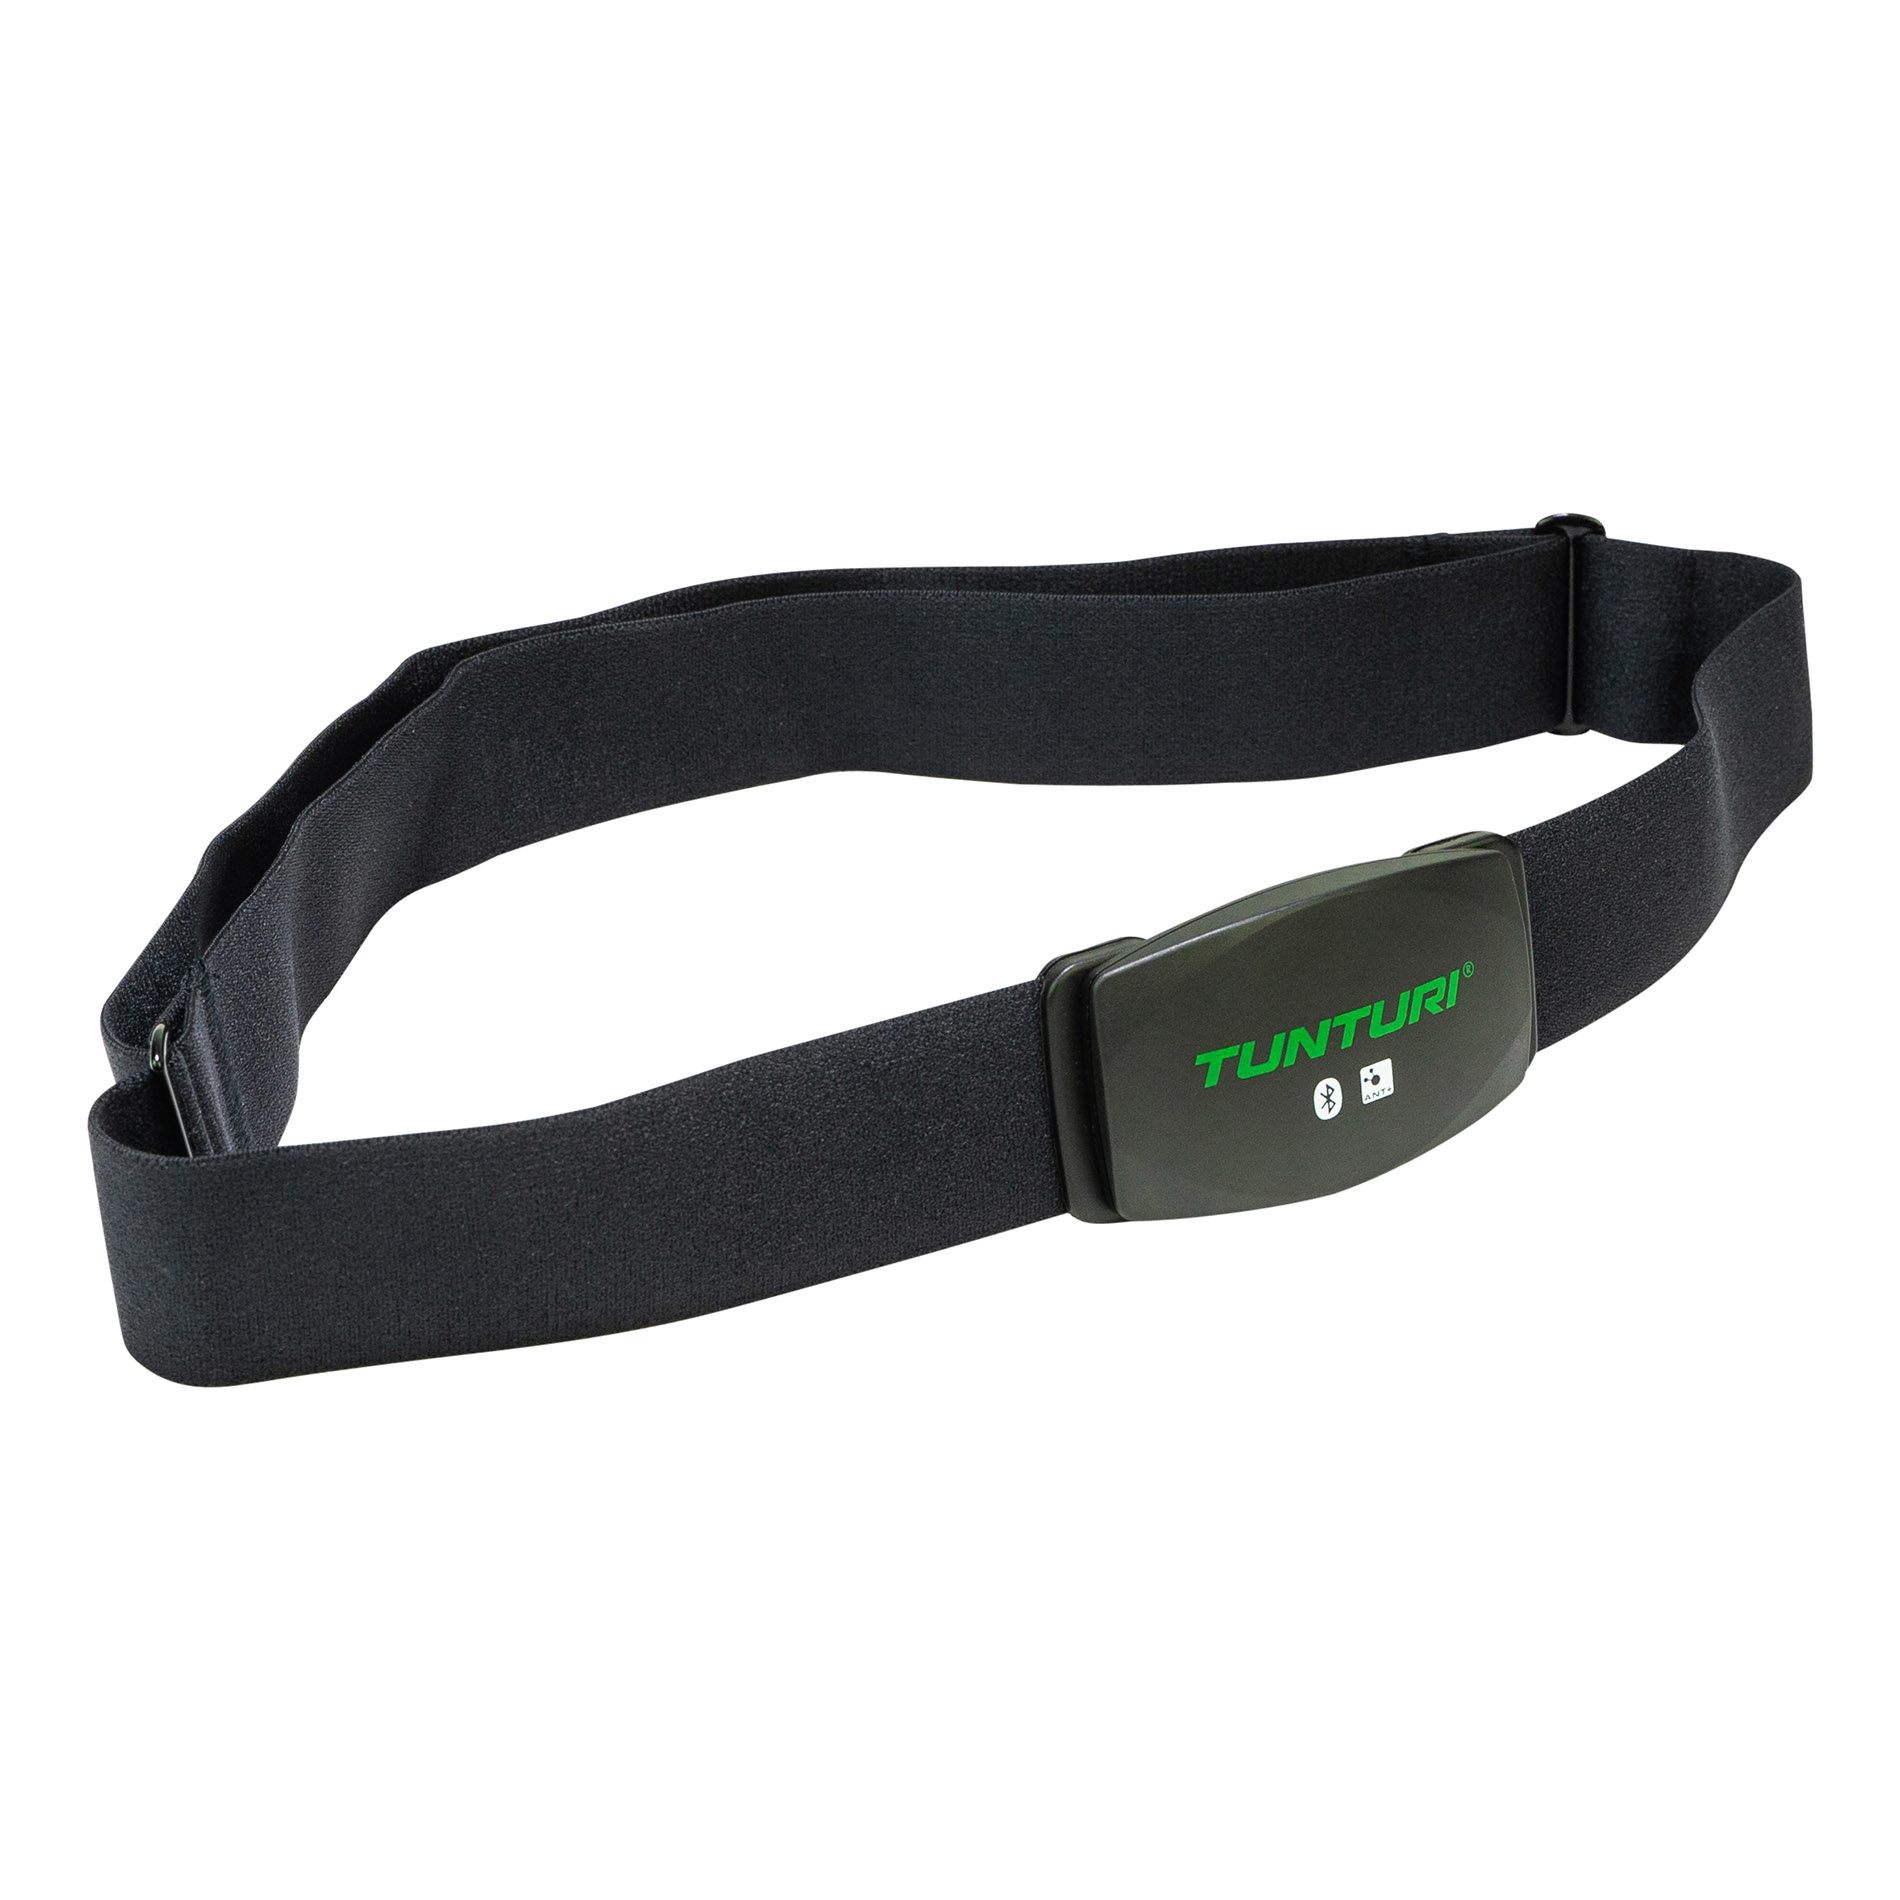 Digital Heart Rate Monitor Chest Belt - hrm ant+ / bluetooth